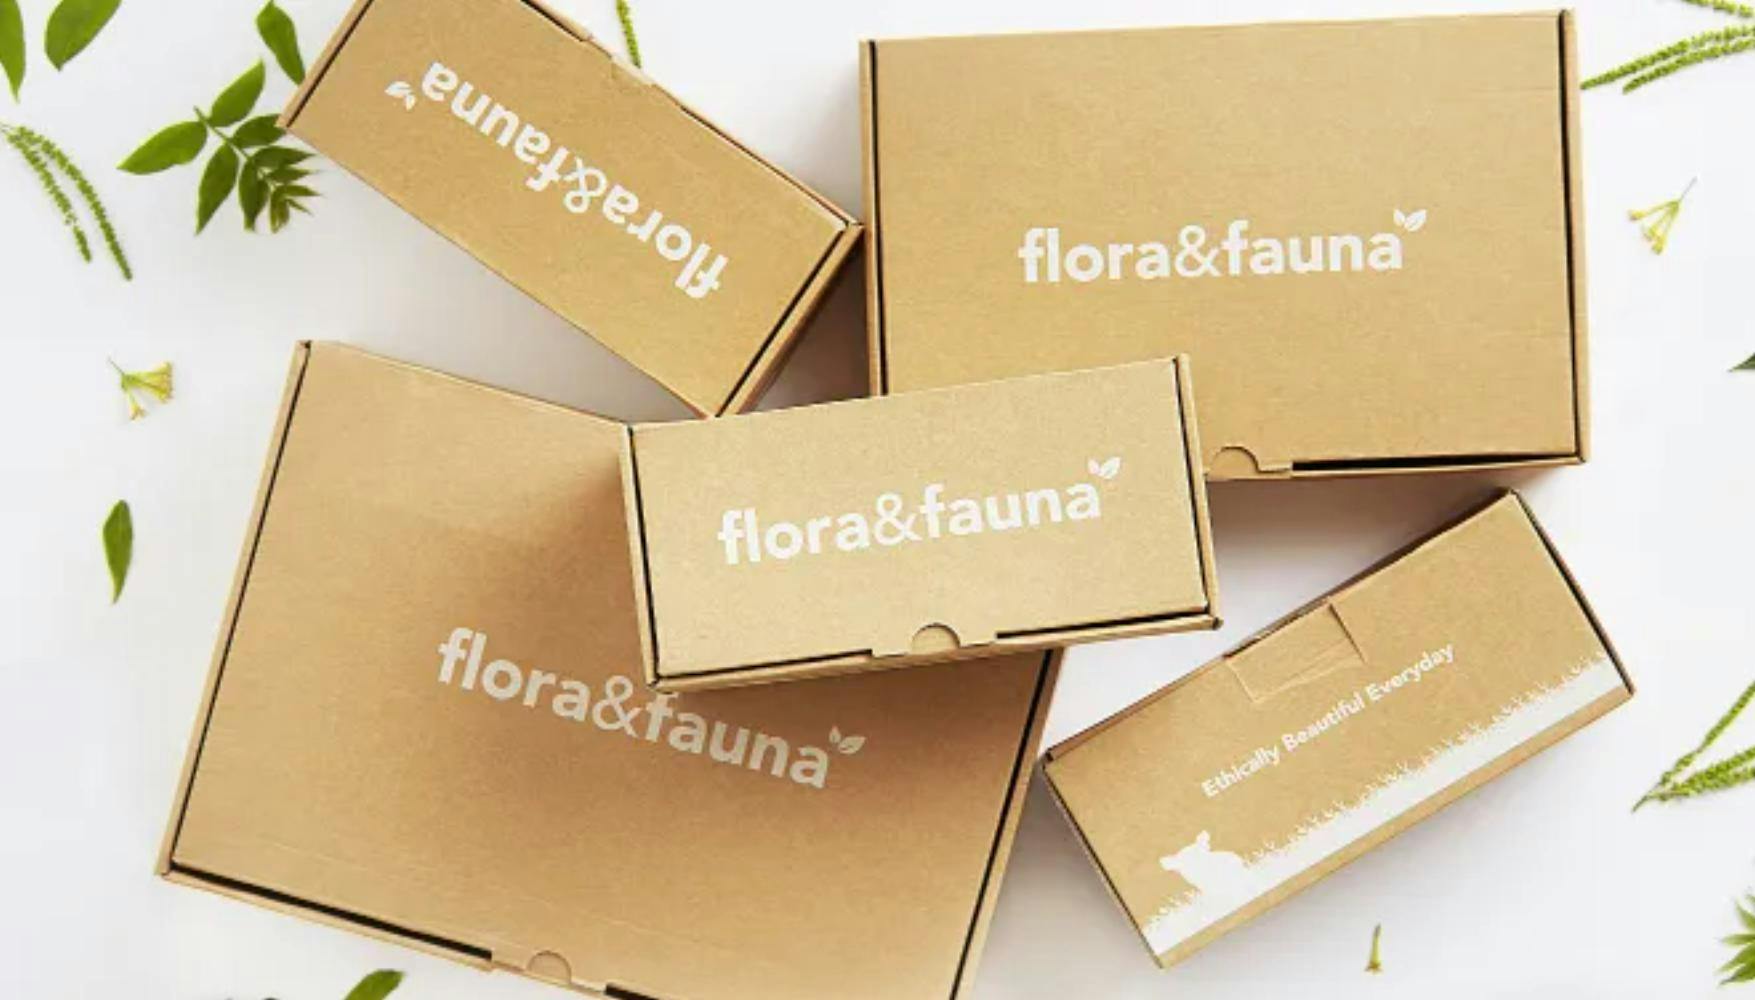 Flora & Fauna tame eCommerce fulfilment with Starshipit